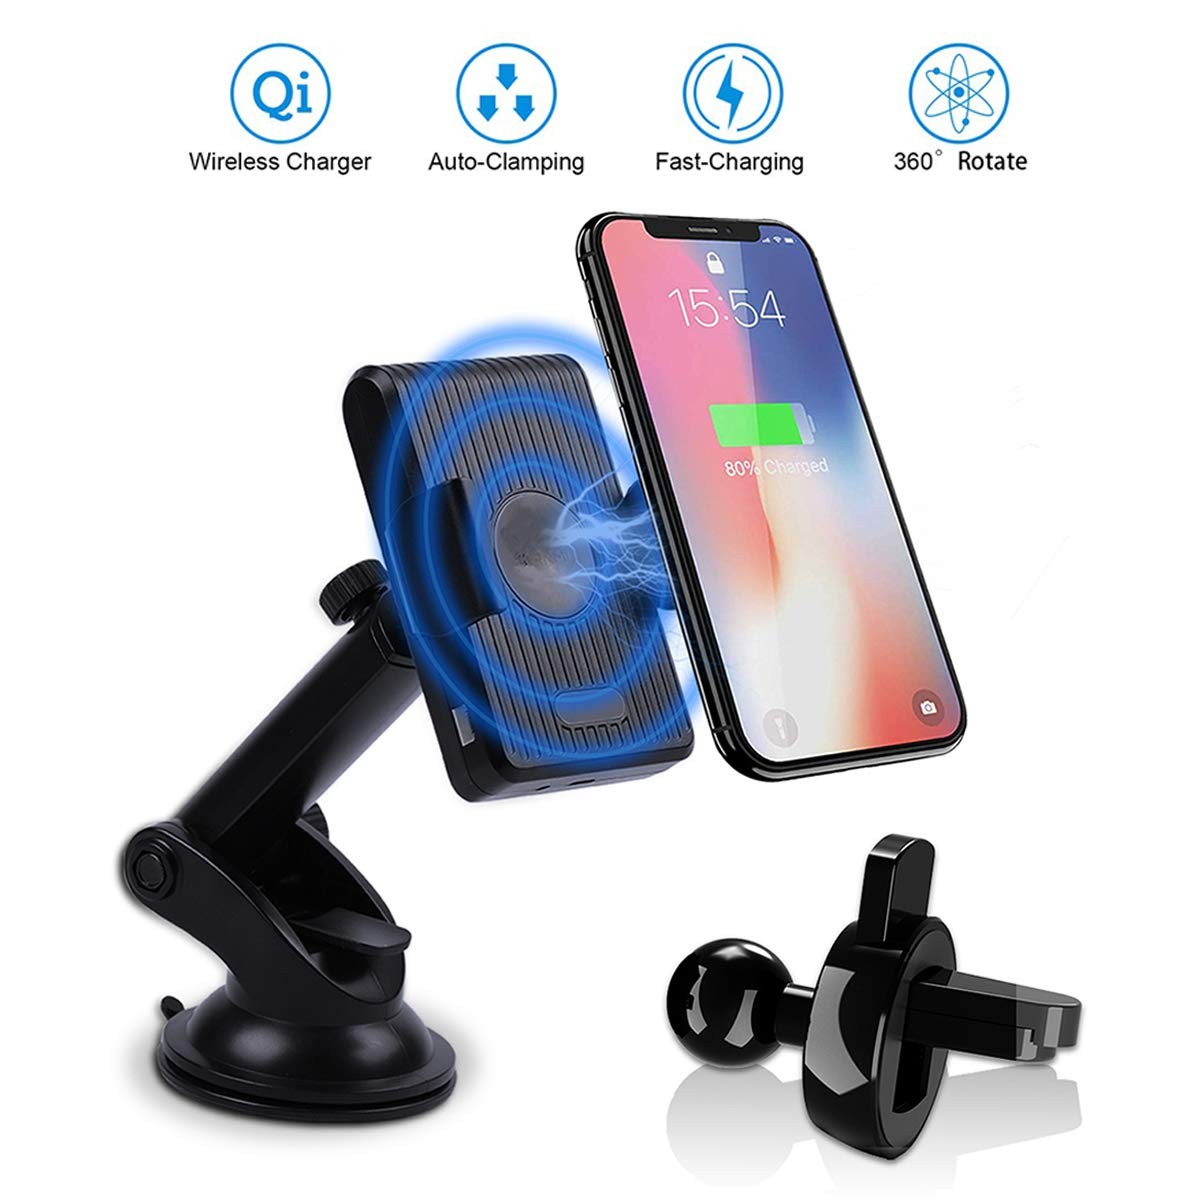 Wireless Car Charger Mount 10W Fast Qi Car Charging Phone Holder Windshield Dashboard Vent Infrared Automatic Clamp Car Mount patible for iPhone Xs Max